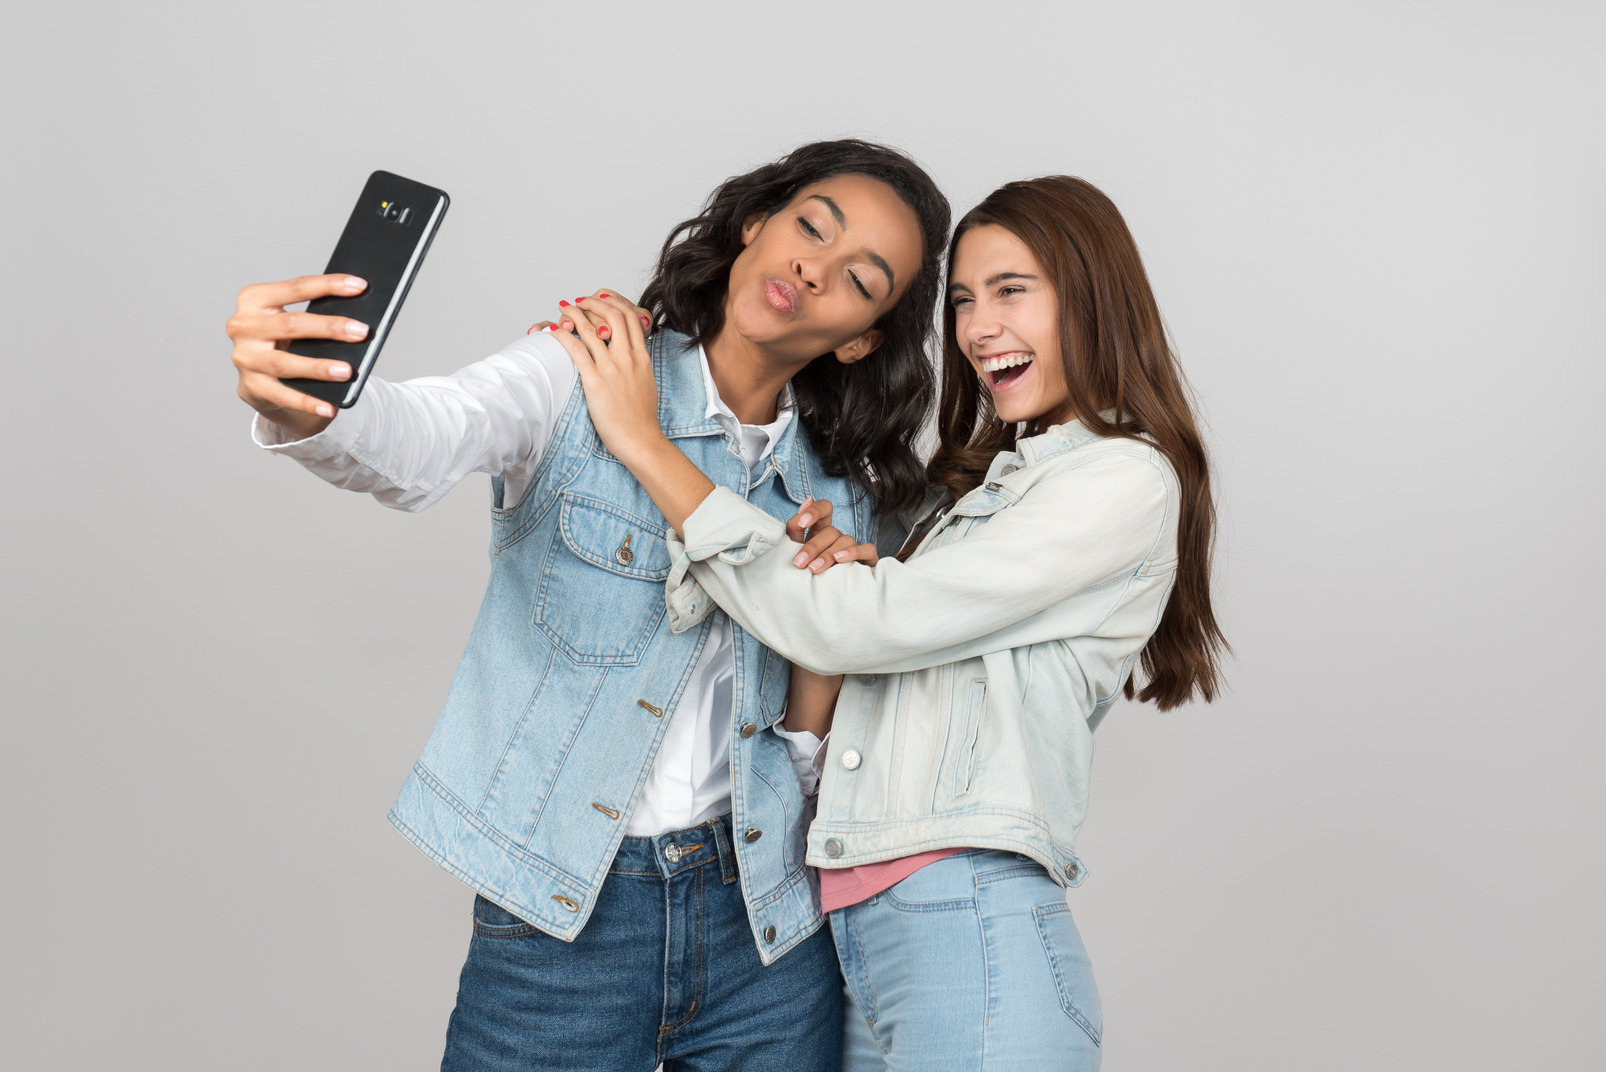 Two young girlfriends making selfies together